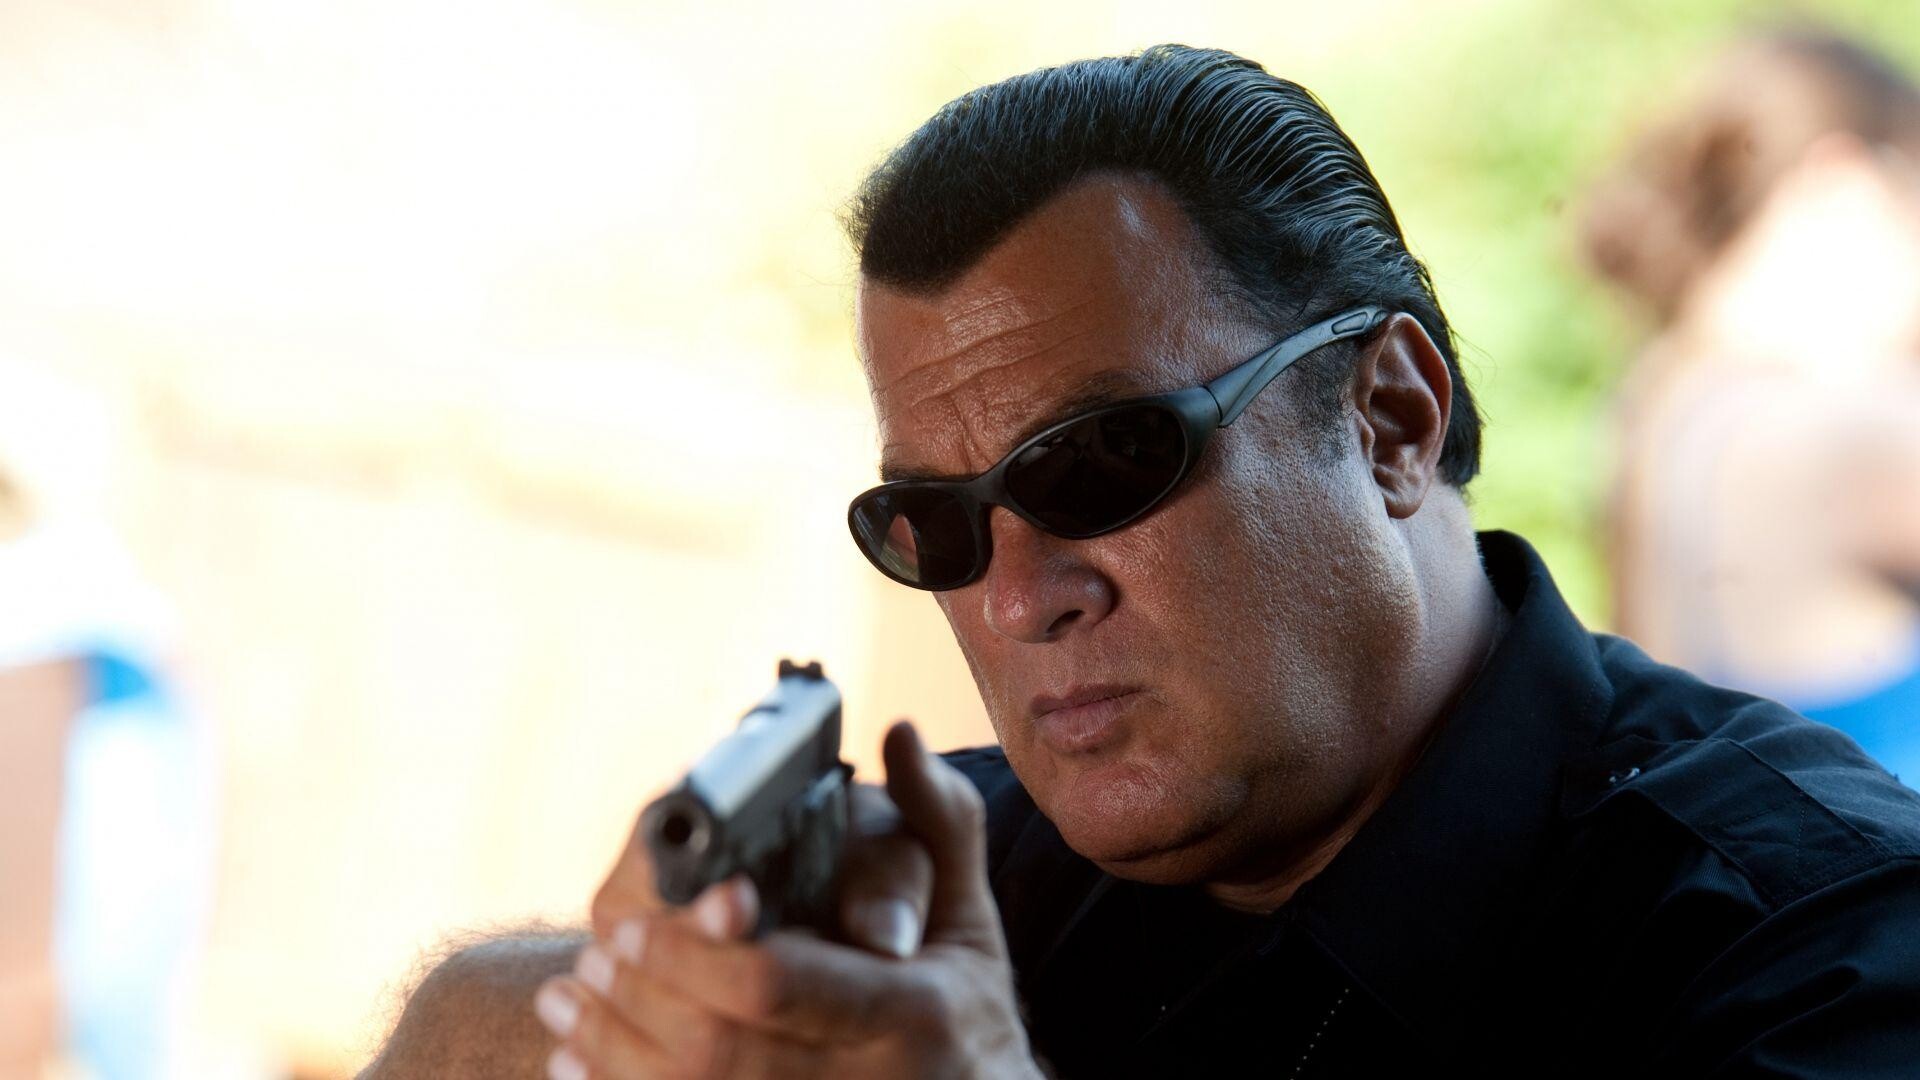 Steven Seagal: 988, Seagal made his acting debut in Above the Law, Box office hits, An action hero. 1920x1080 Full HD Background.